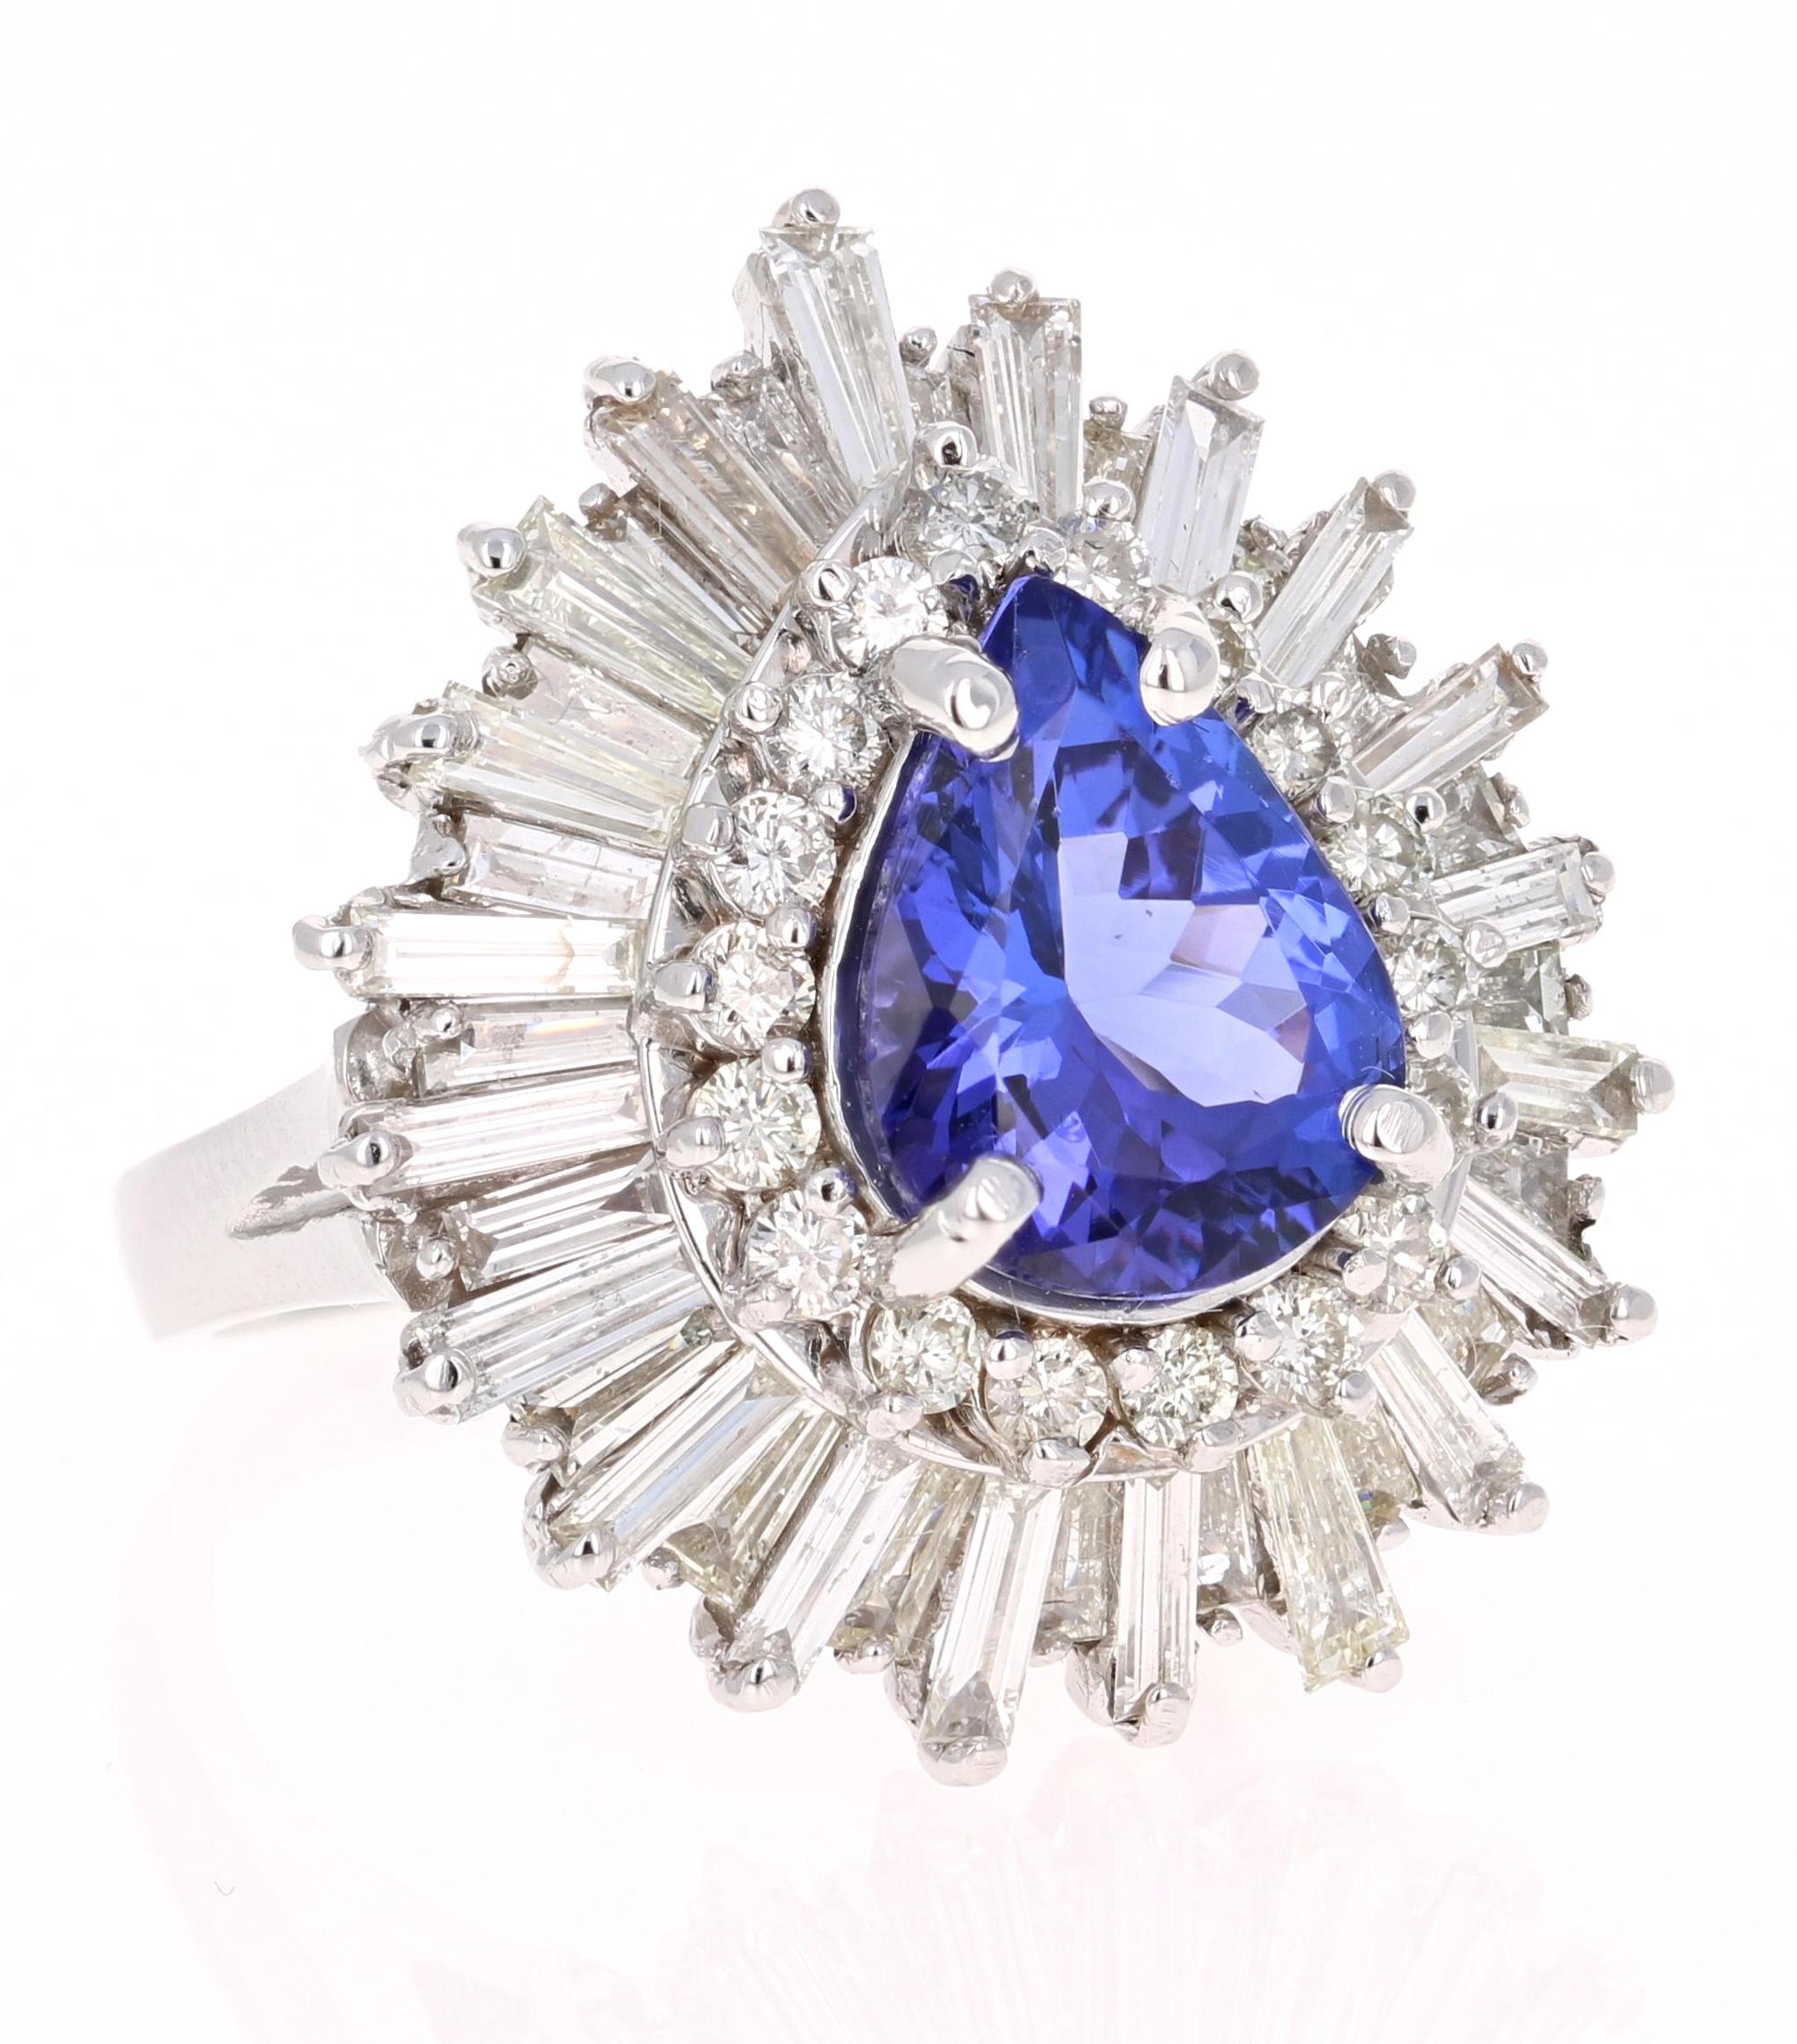 Elegant Victorian-Inspired Ballerina Setting Ring! 

This ring has a radiant bluish-purple Pear Cut Tanzanite weighing 3.17 Carats. It is surrounded by 18 Round Cut Diamonds that weigh 0.54 Carats and 41 Baguette Cut Diamonds that weigh 2.45 Carats.